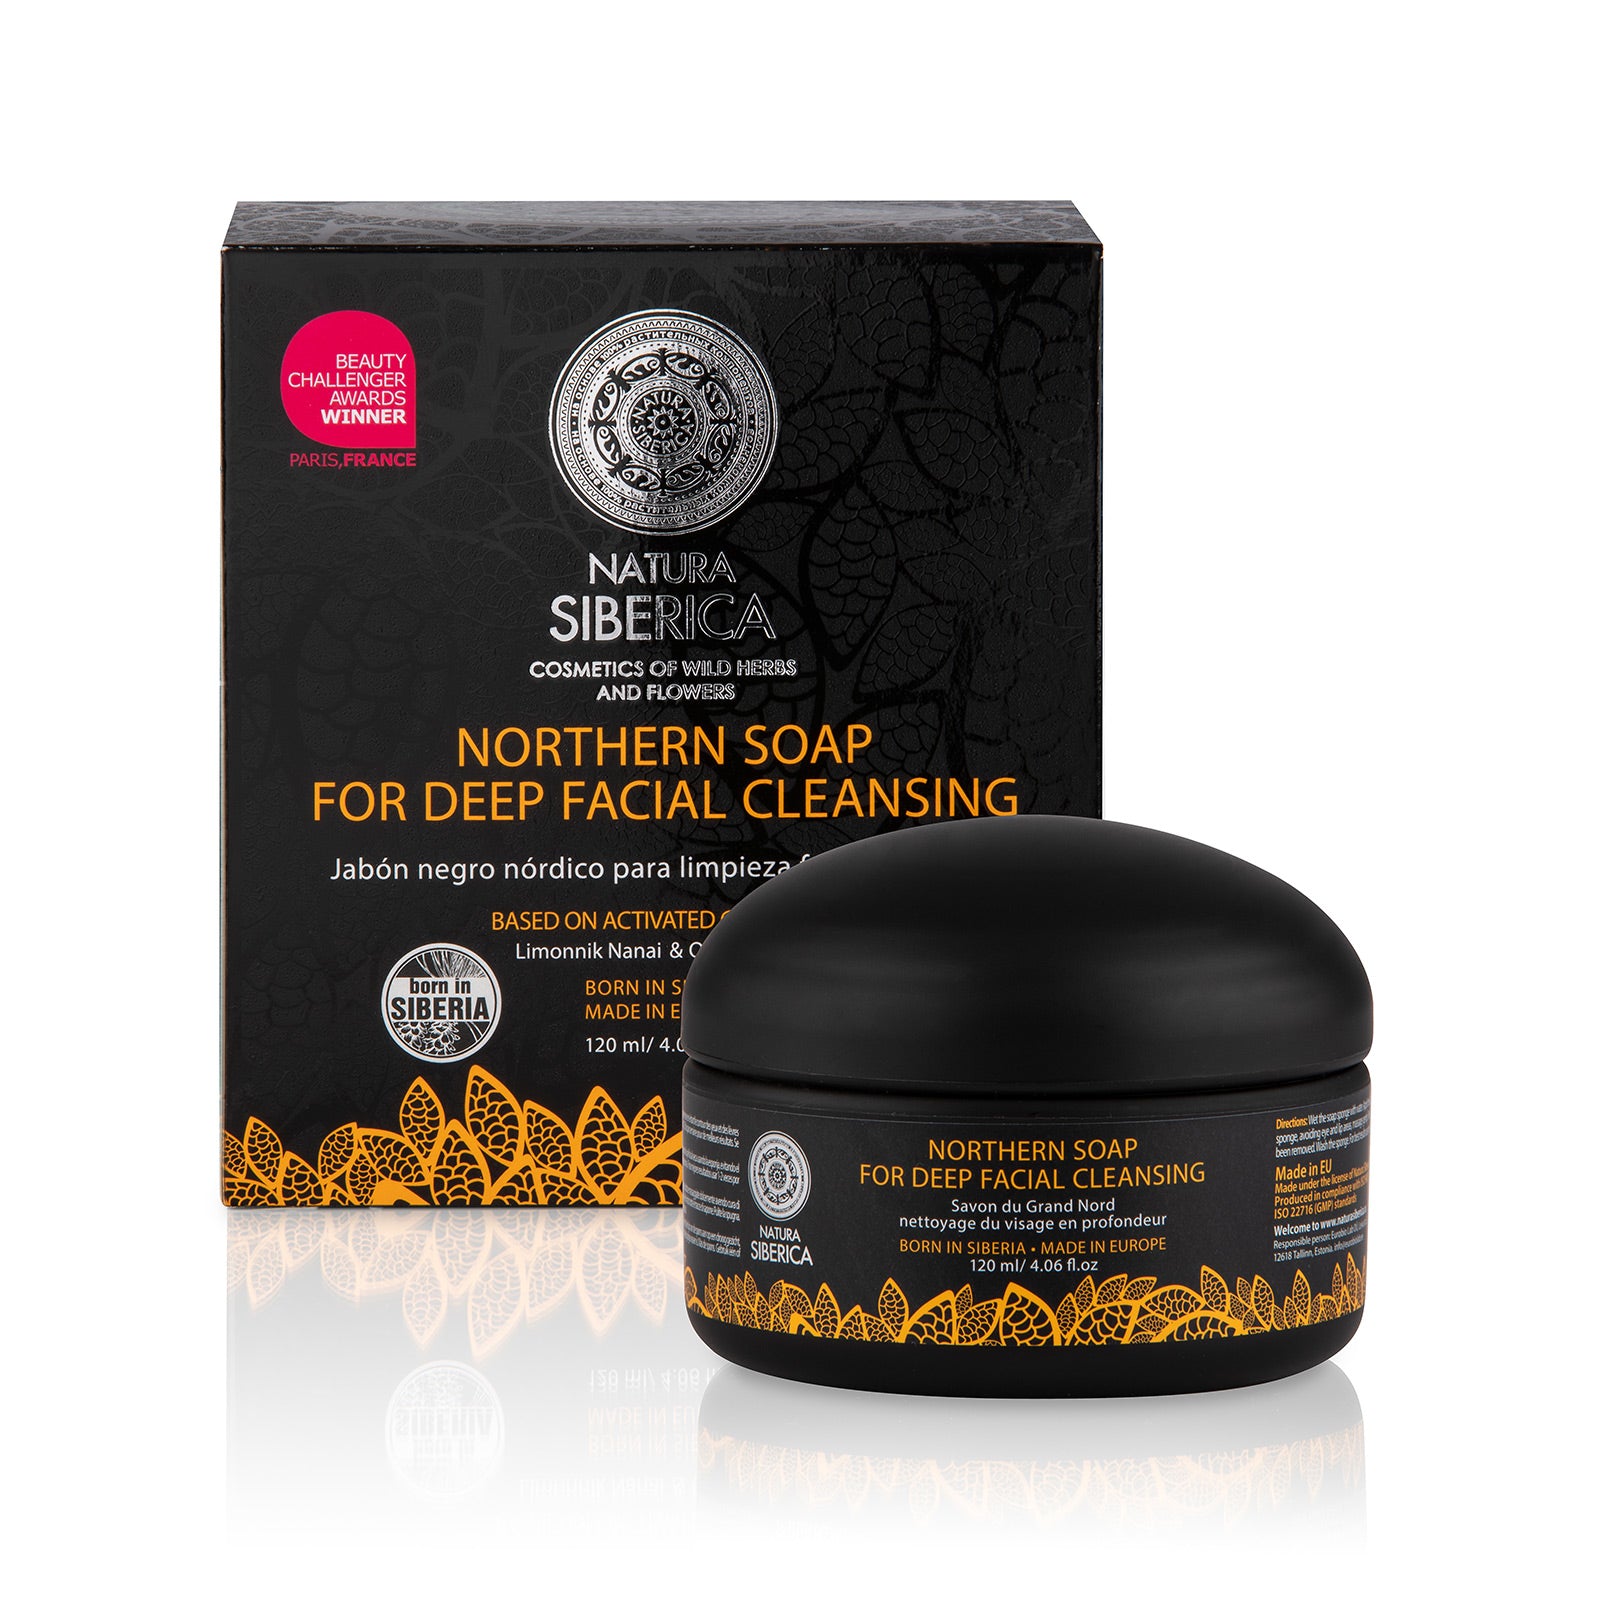 Northern Soap for Deep Facial Cleansing, 120 ml